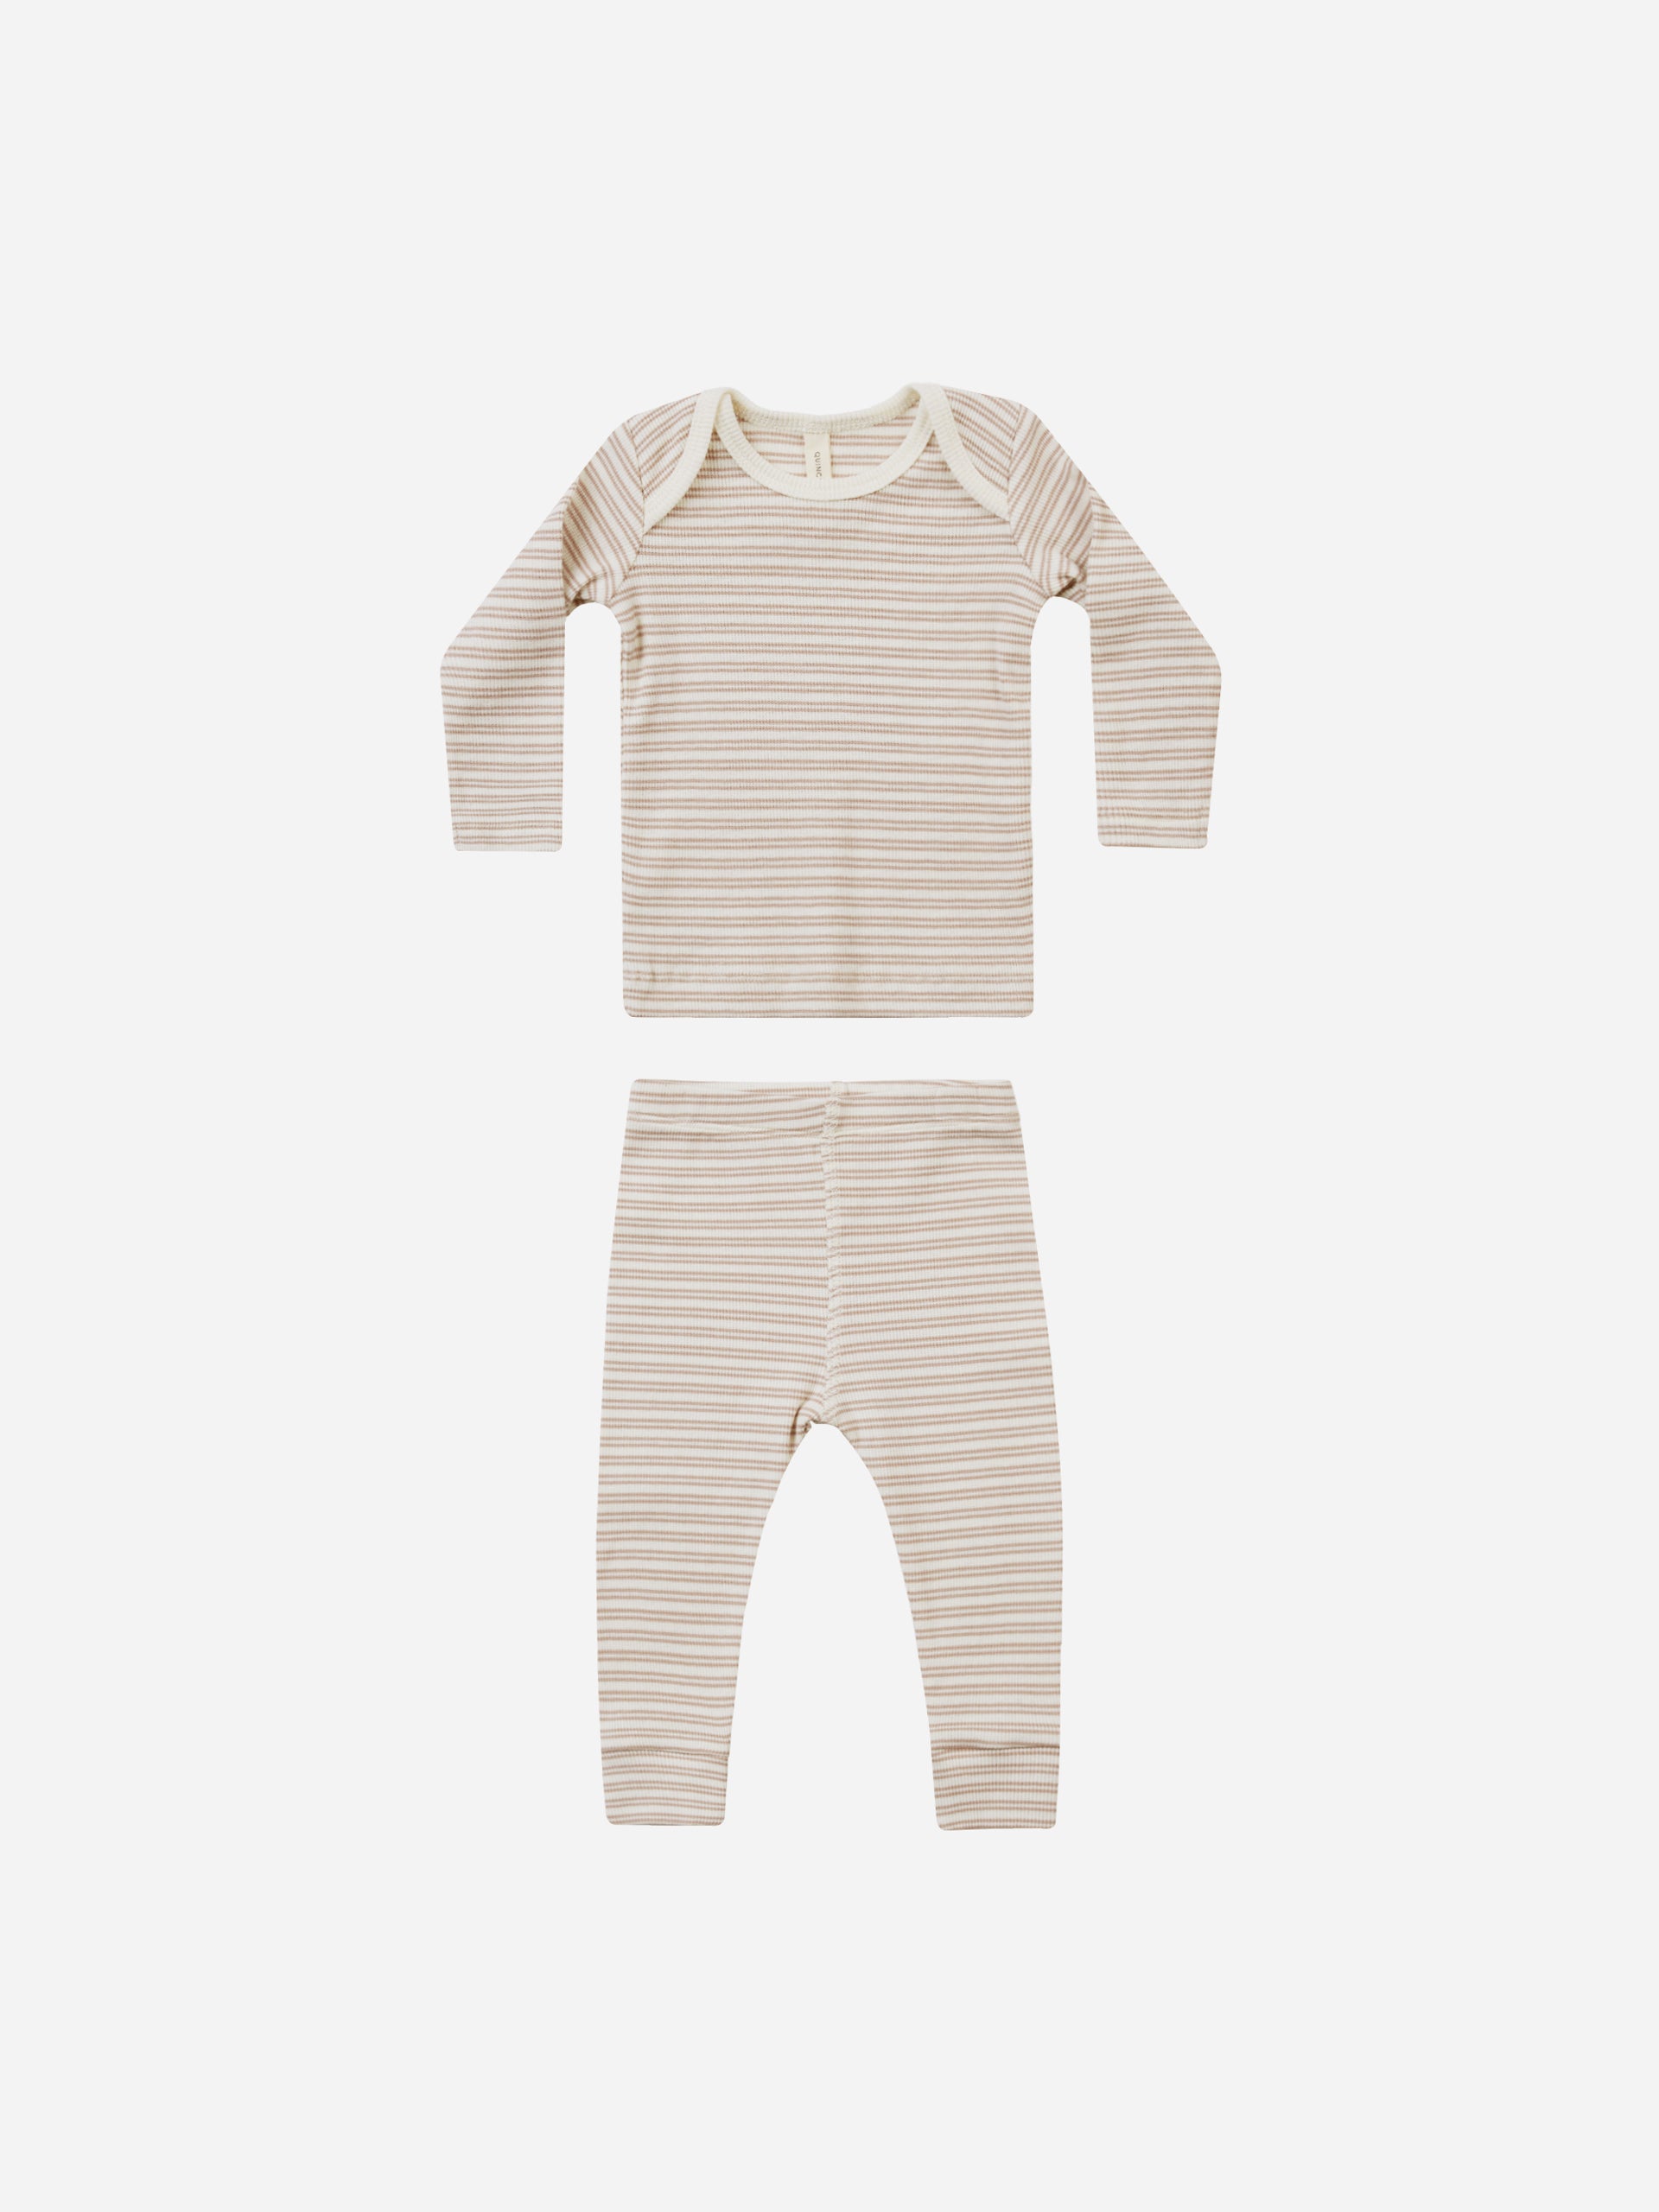 Ribbed Tee + Legging Set || Oat Stripe - Rylee + Cru | Kids Clothes | Trendy Baby Clothes | Modern Infant Outfits |